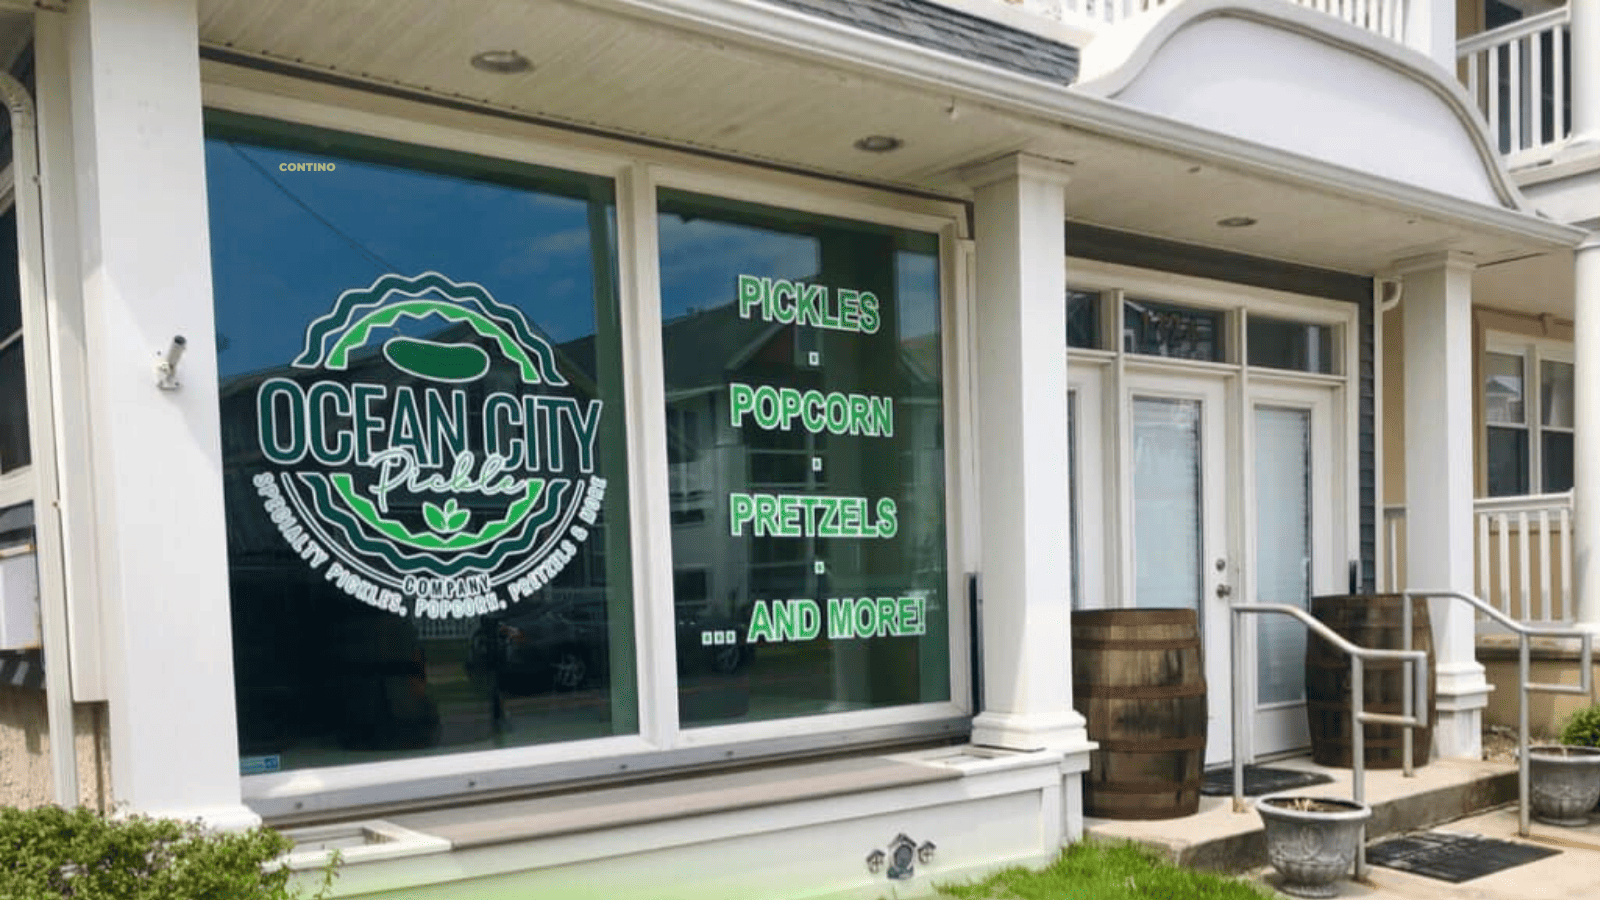 New Pickle Place Coming to the Jersey Shore